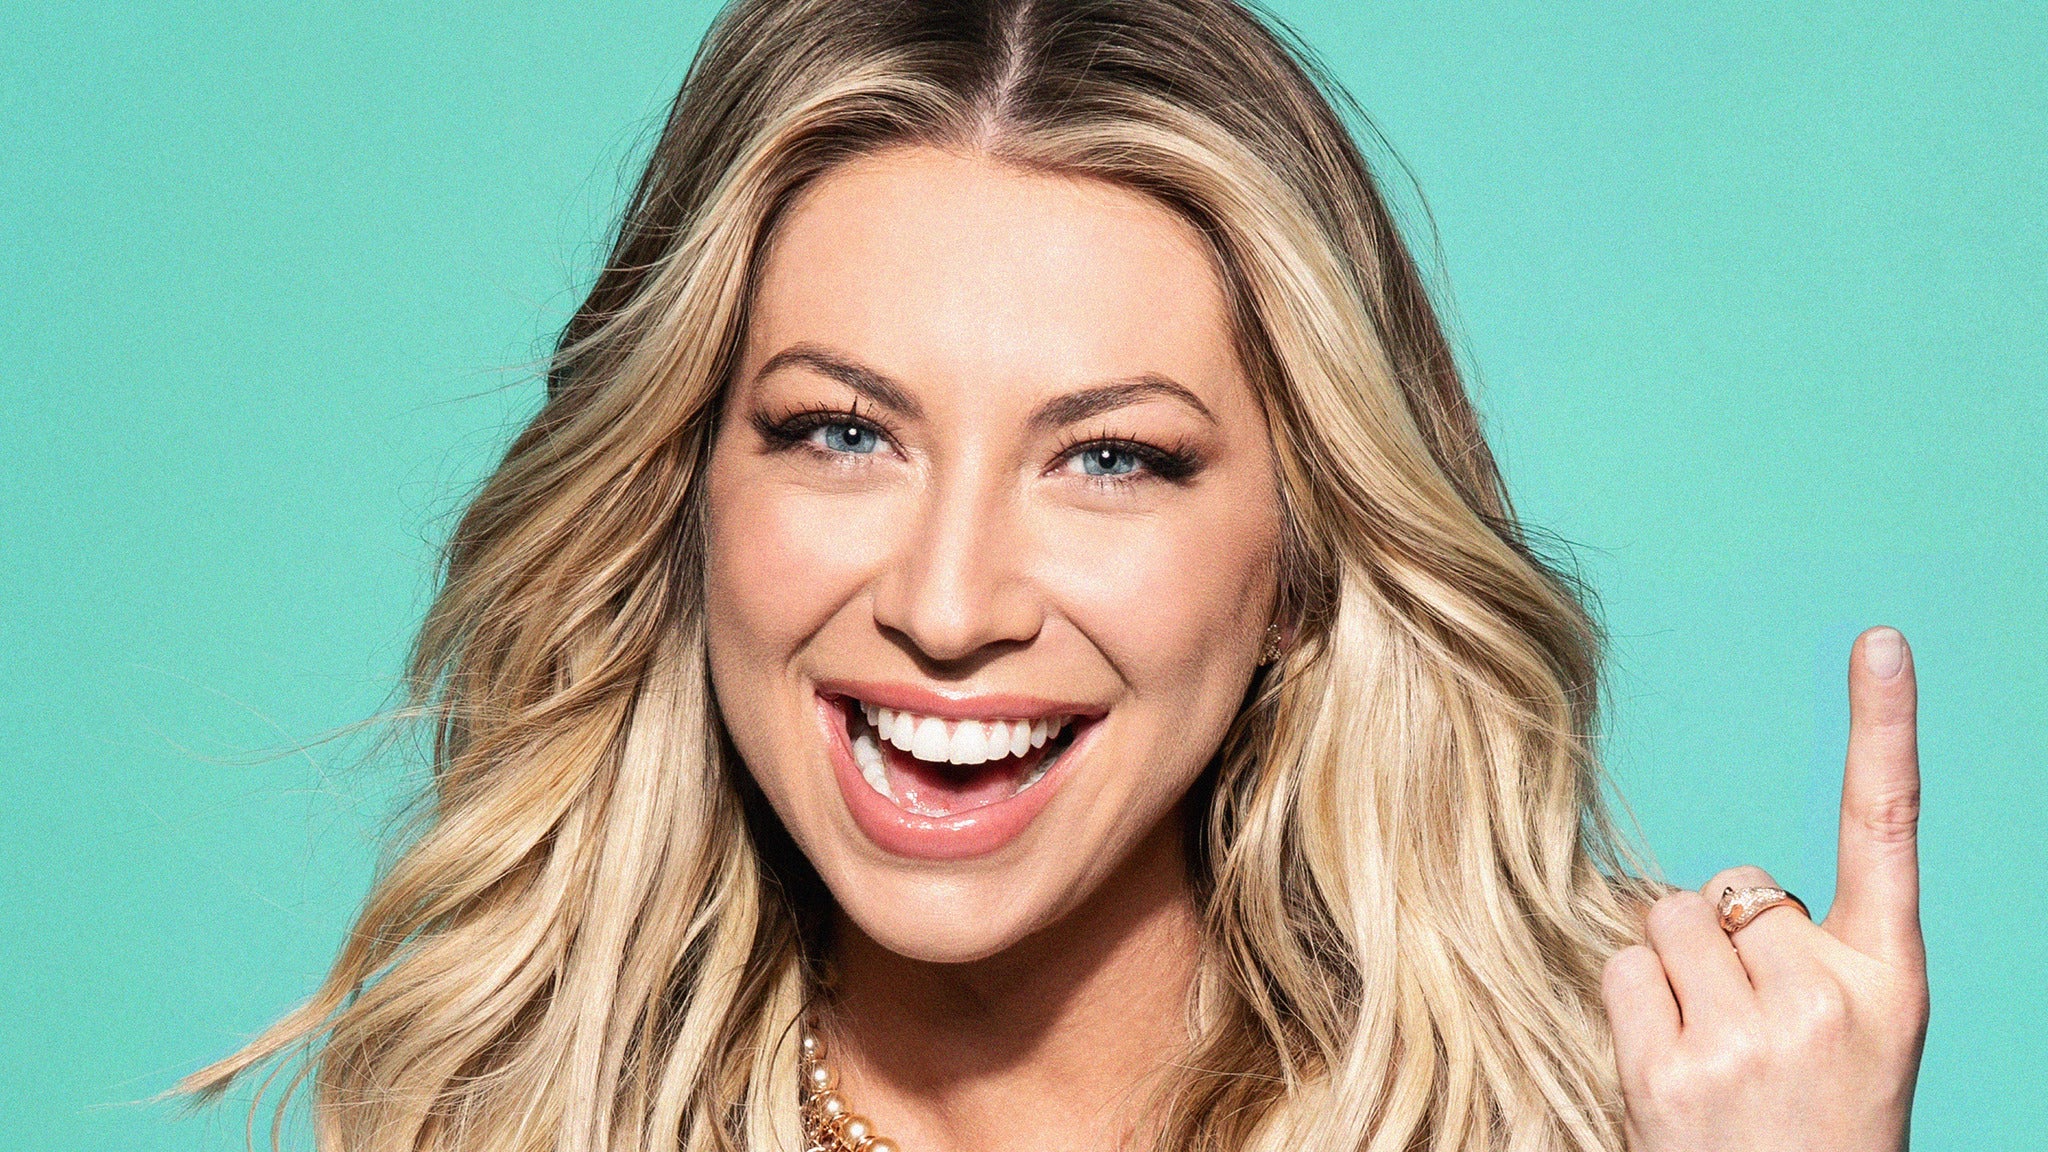 Straight Up With Stassi Live in Chattanooga promo photo for Venue Online presale offer code